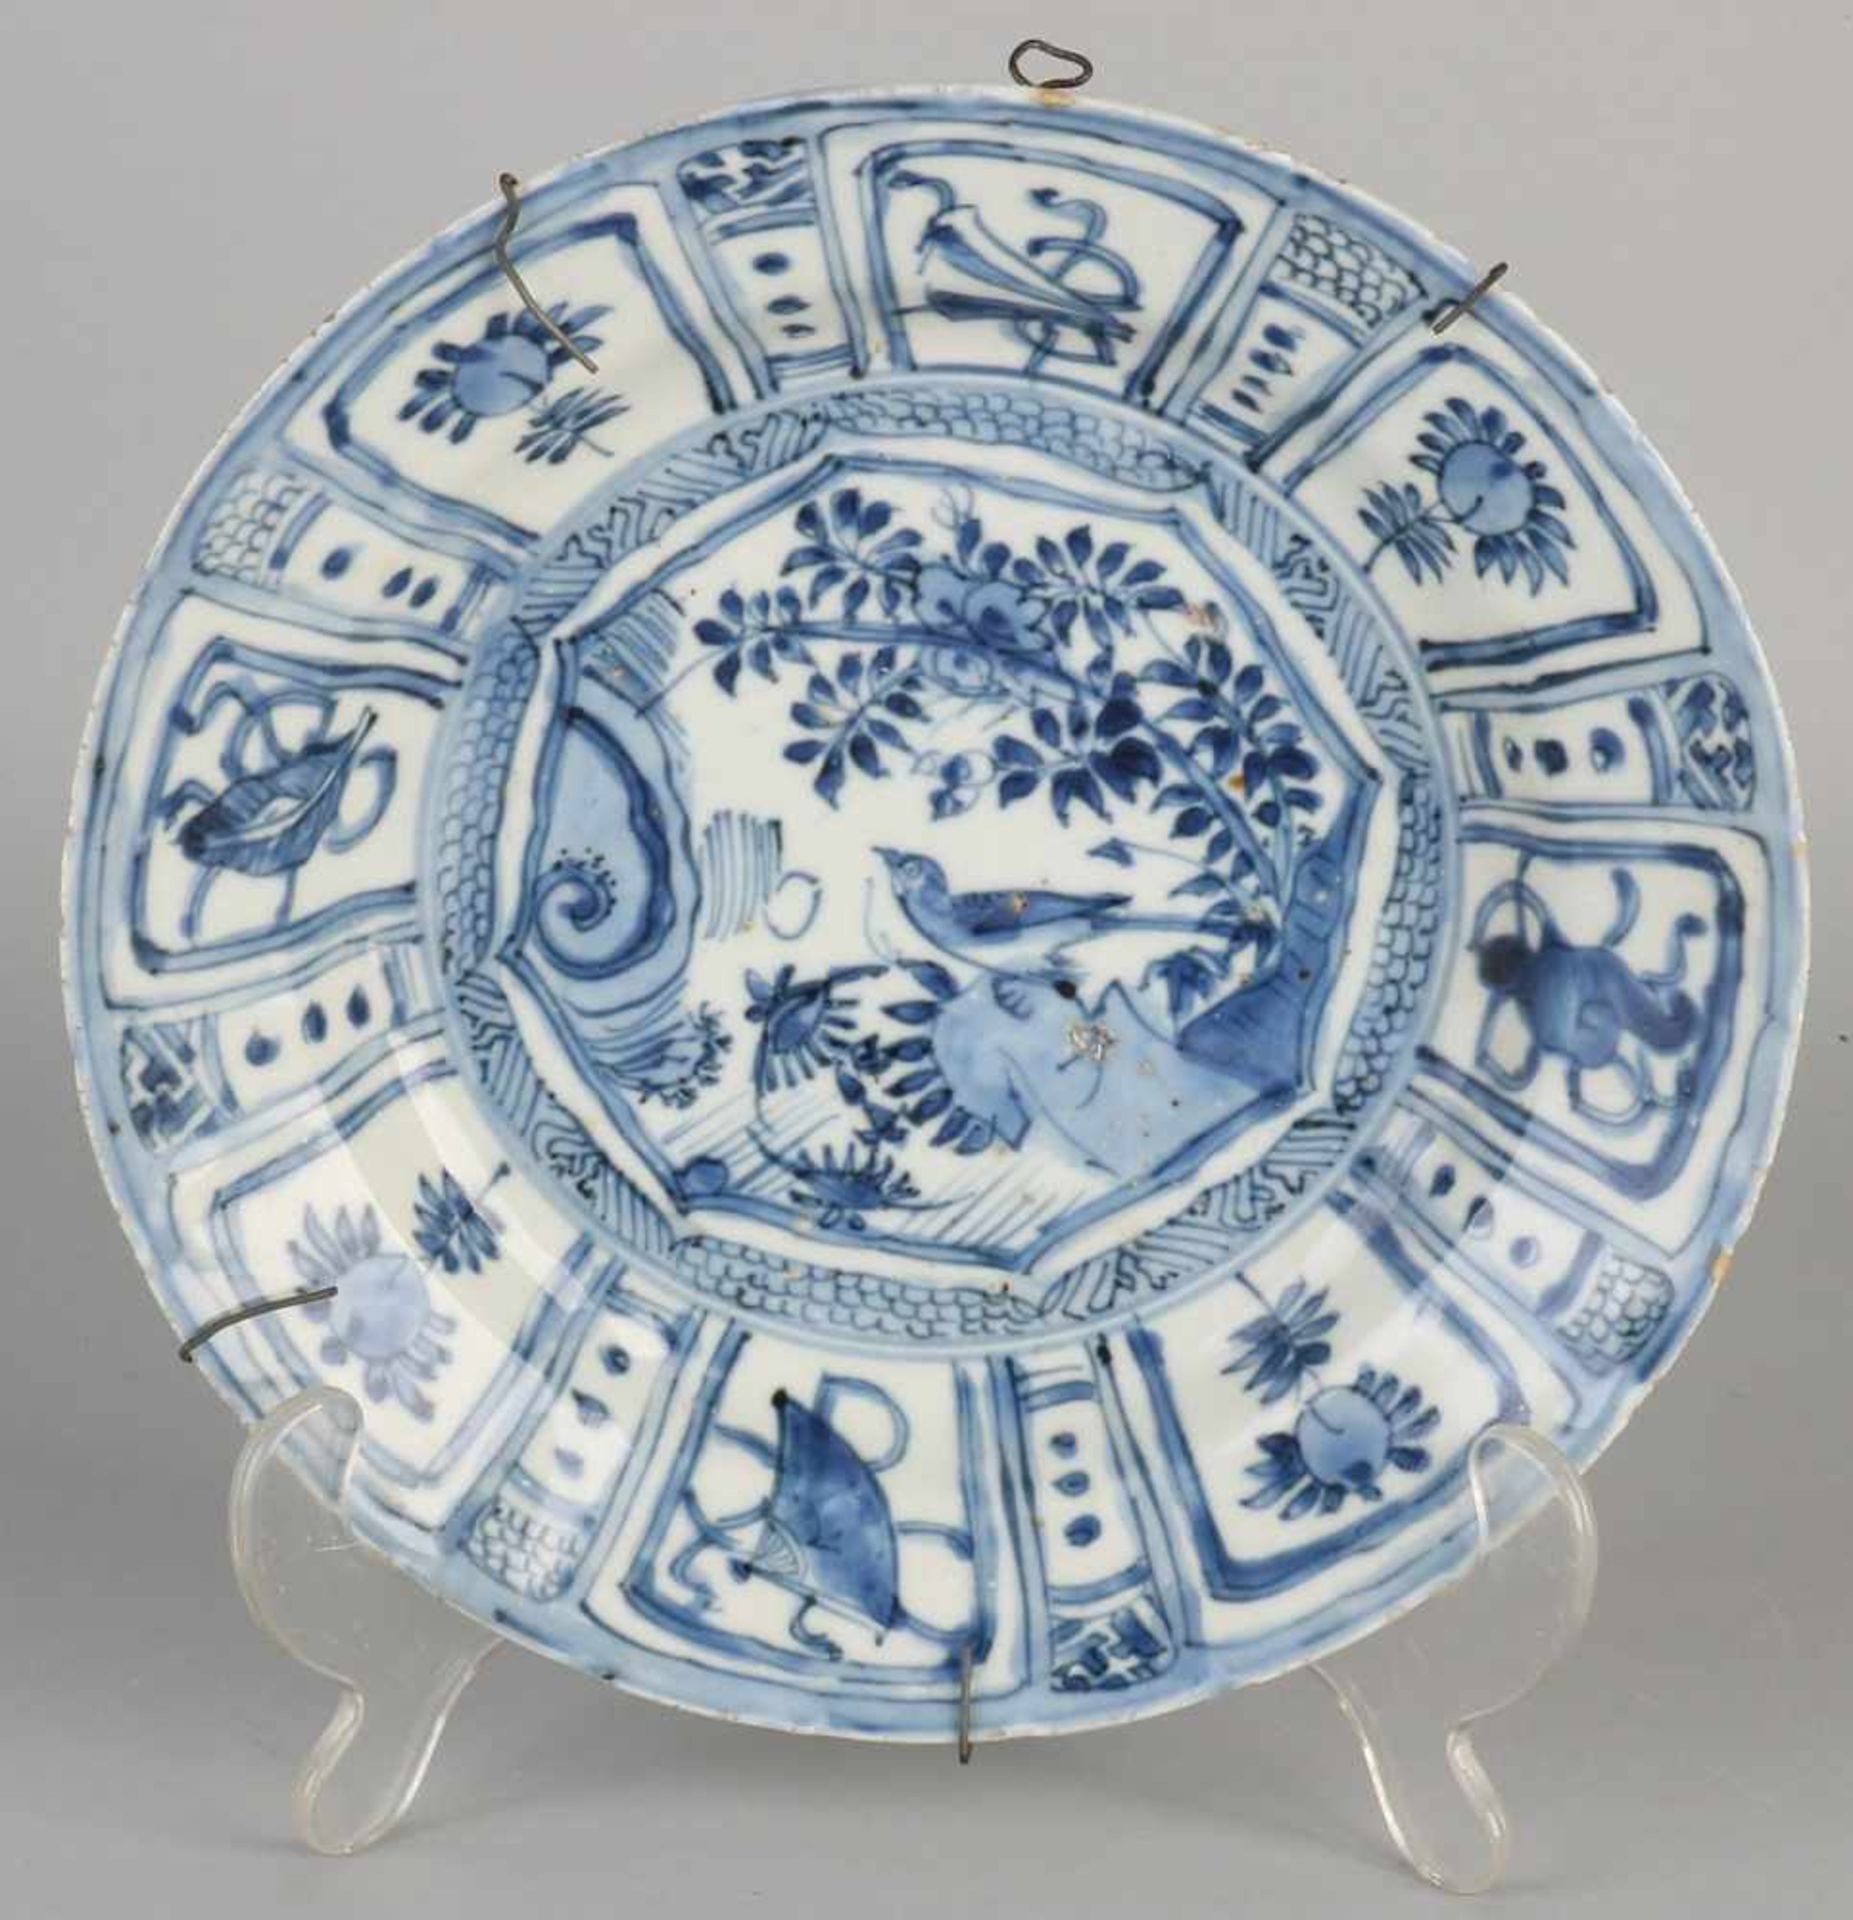 17th century Chinese porcelain Wanli plate with backdrop decor. Size: ø 21 cm. In good condition.17.